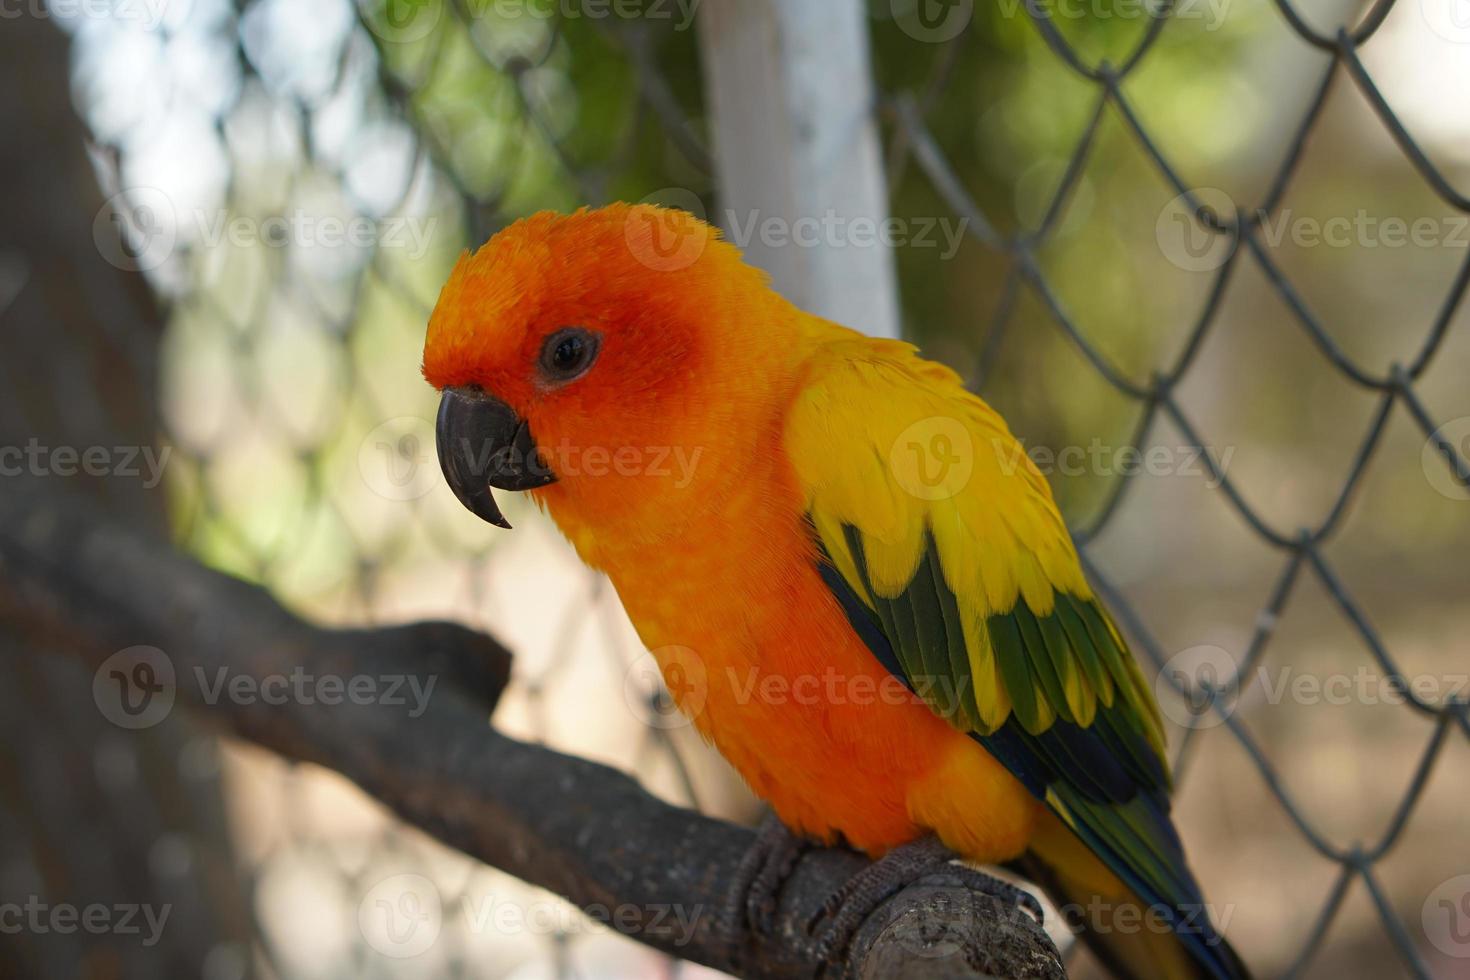 Colorful parrots in the park photo